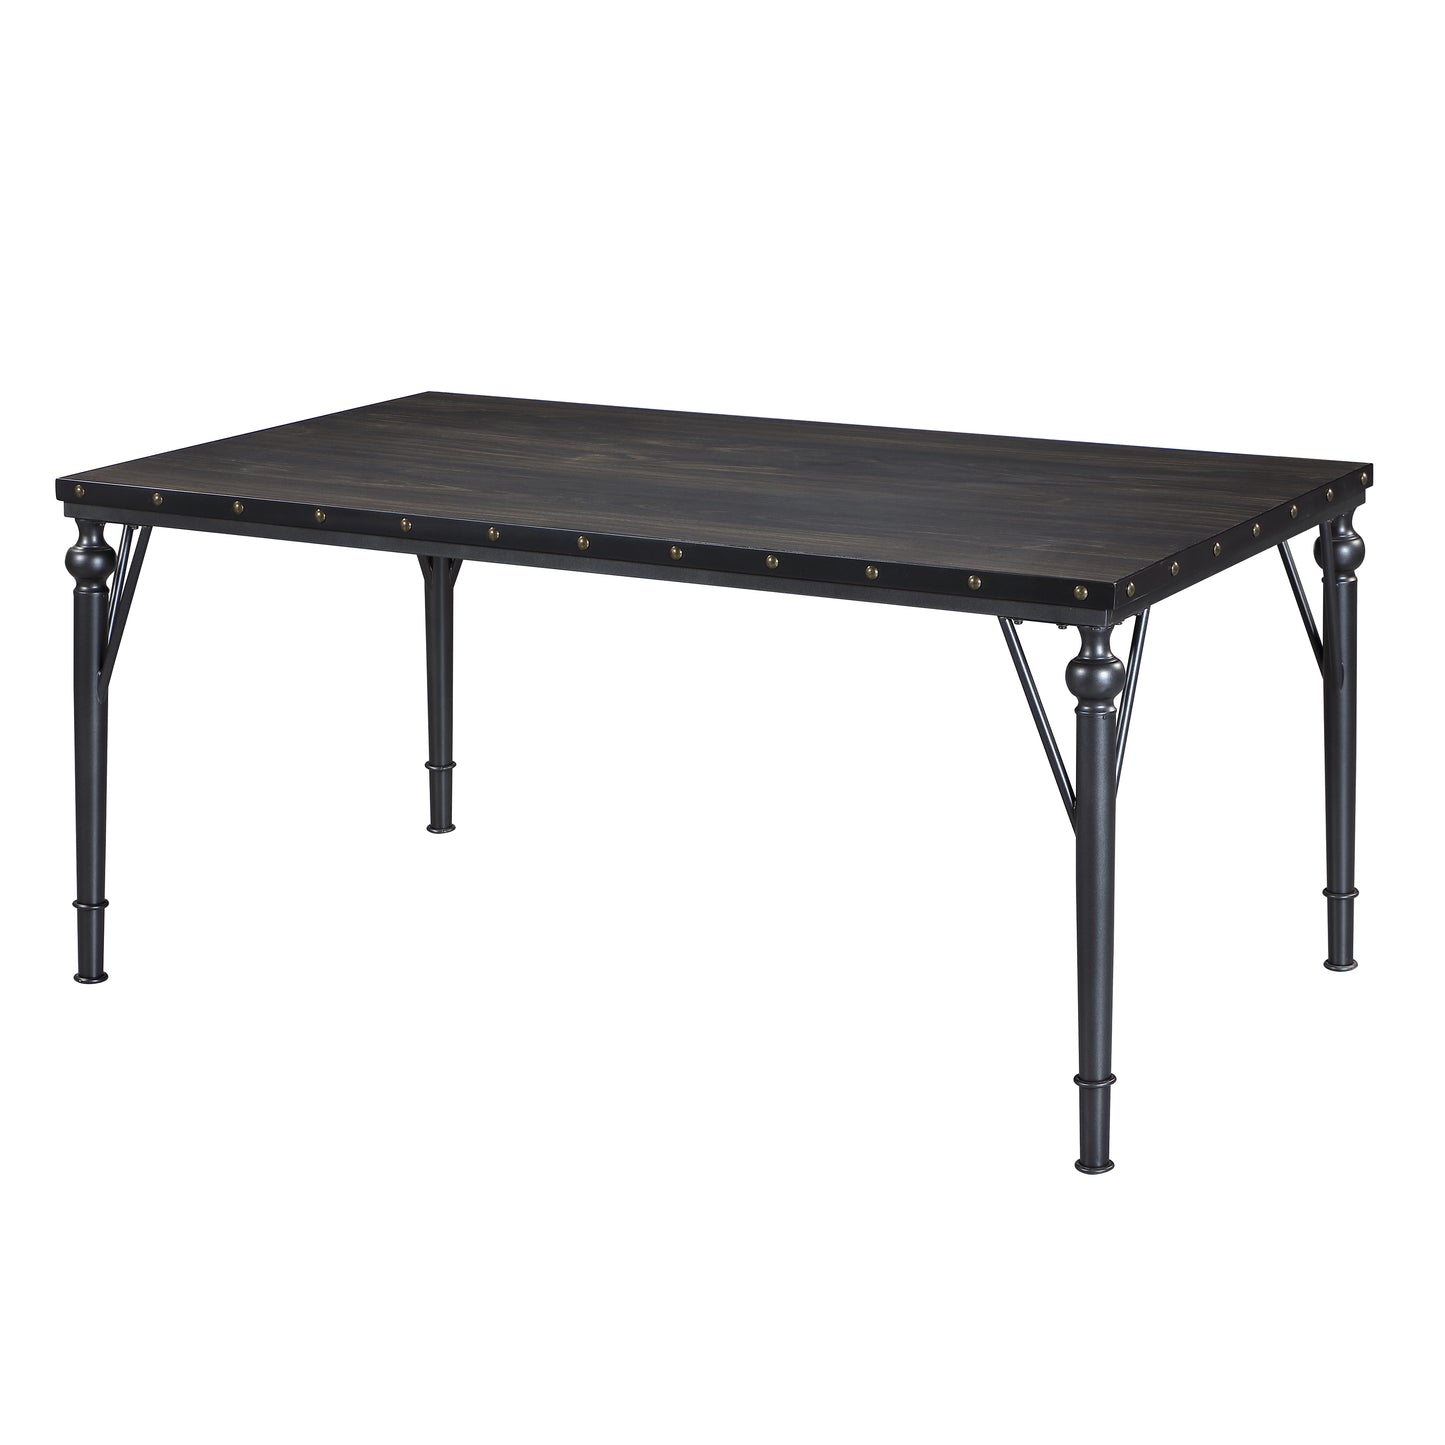 Biony Nailhead Espresso Wood Dining Table with Metal Frame